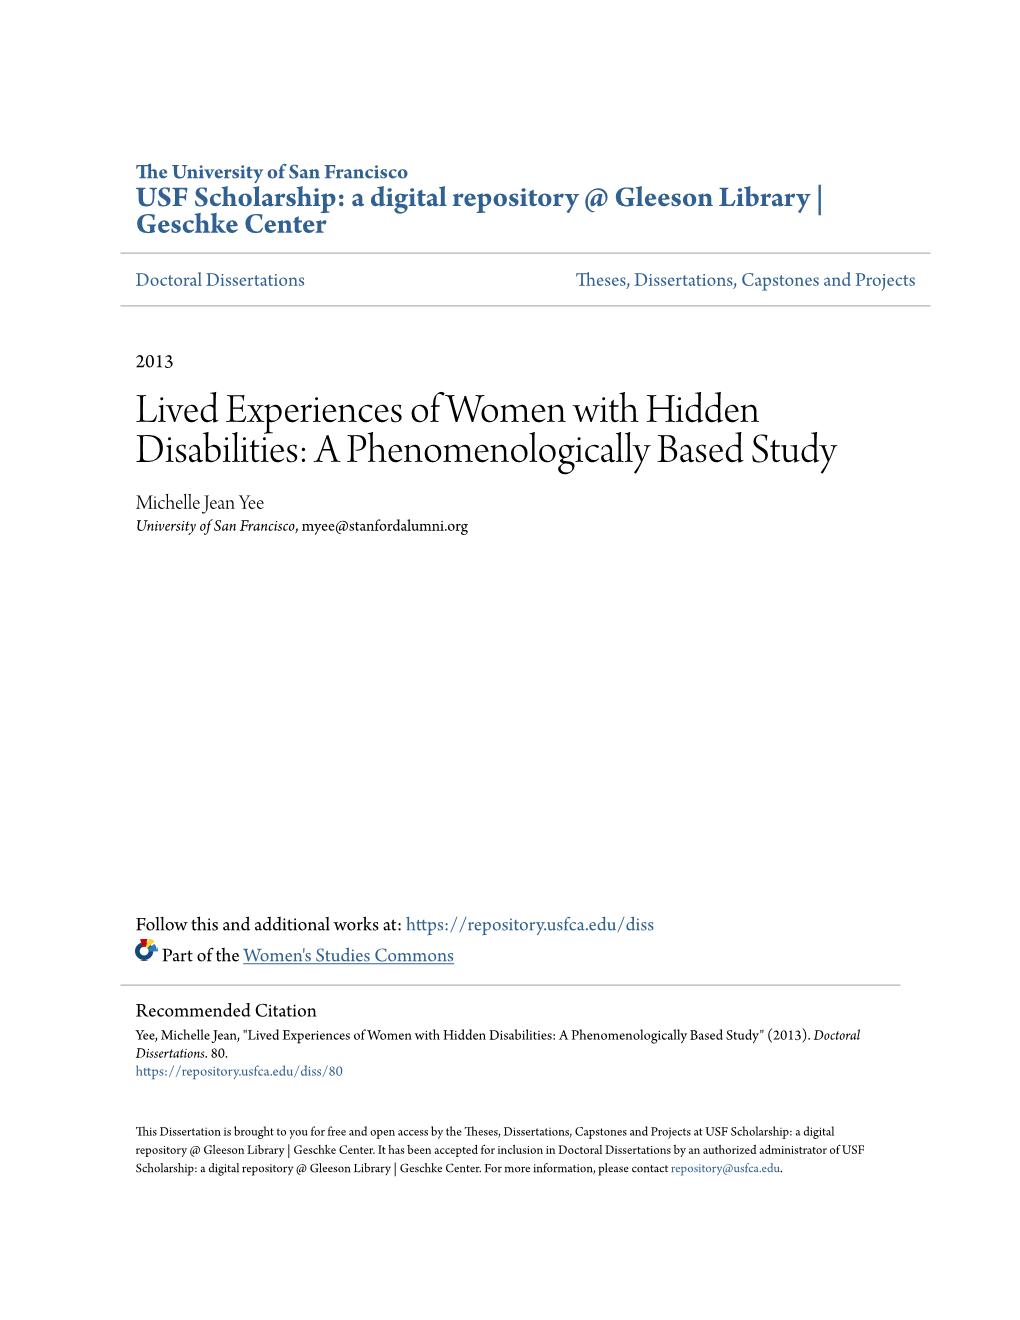 Lived Experiences of Women with Hidden Disabilities: a Phenomenologically Based Study Michelle Jean Yee University of San Francisco, Myee@Stanfordalumni.Org